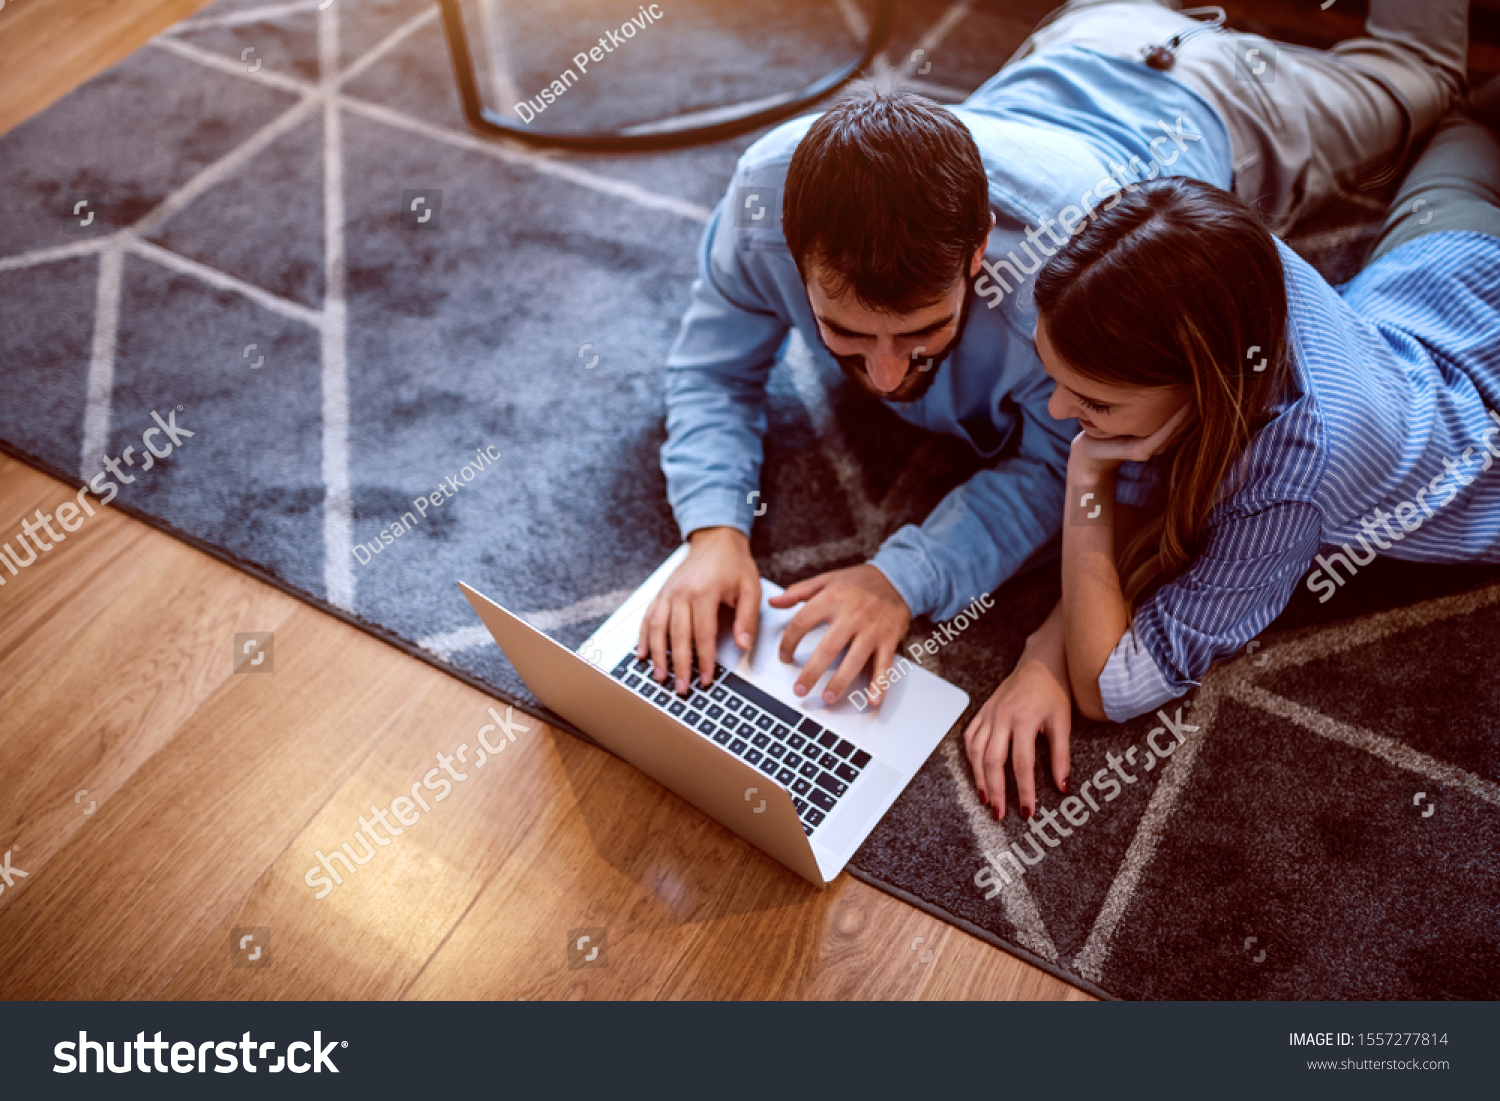 Top View Charming Caucasian Couple Love Stock Photo 1557277814 ...